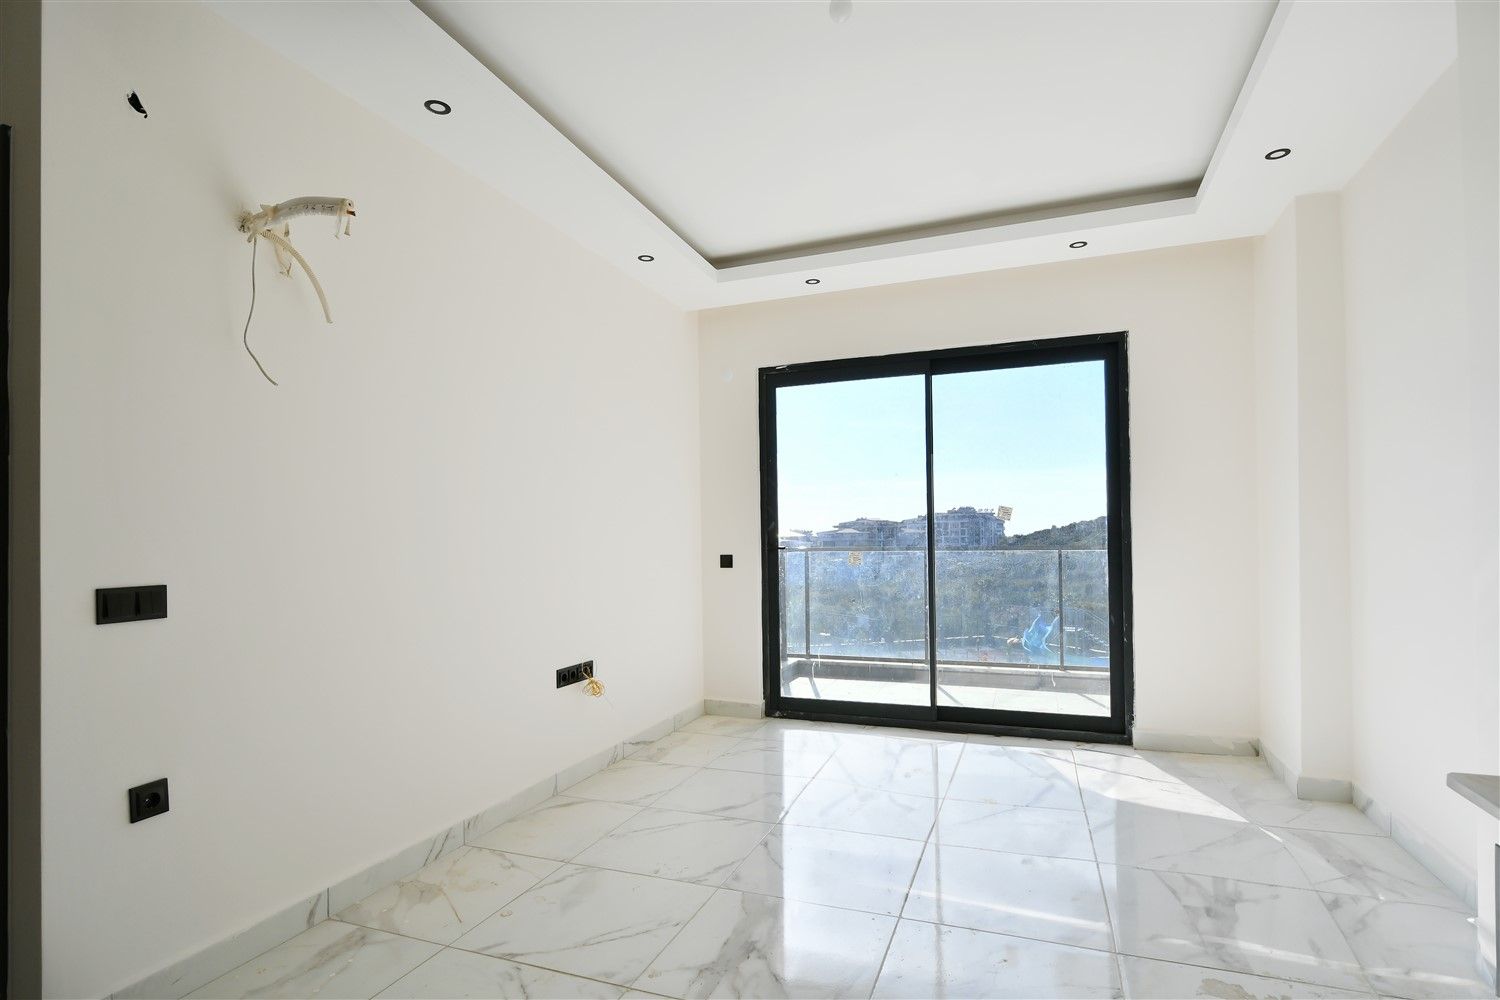 New 1+1 and 2+1 apartments in a new building - Kestel district, Alanya